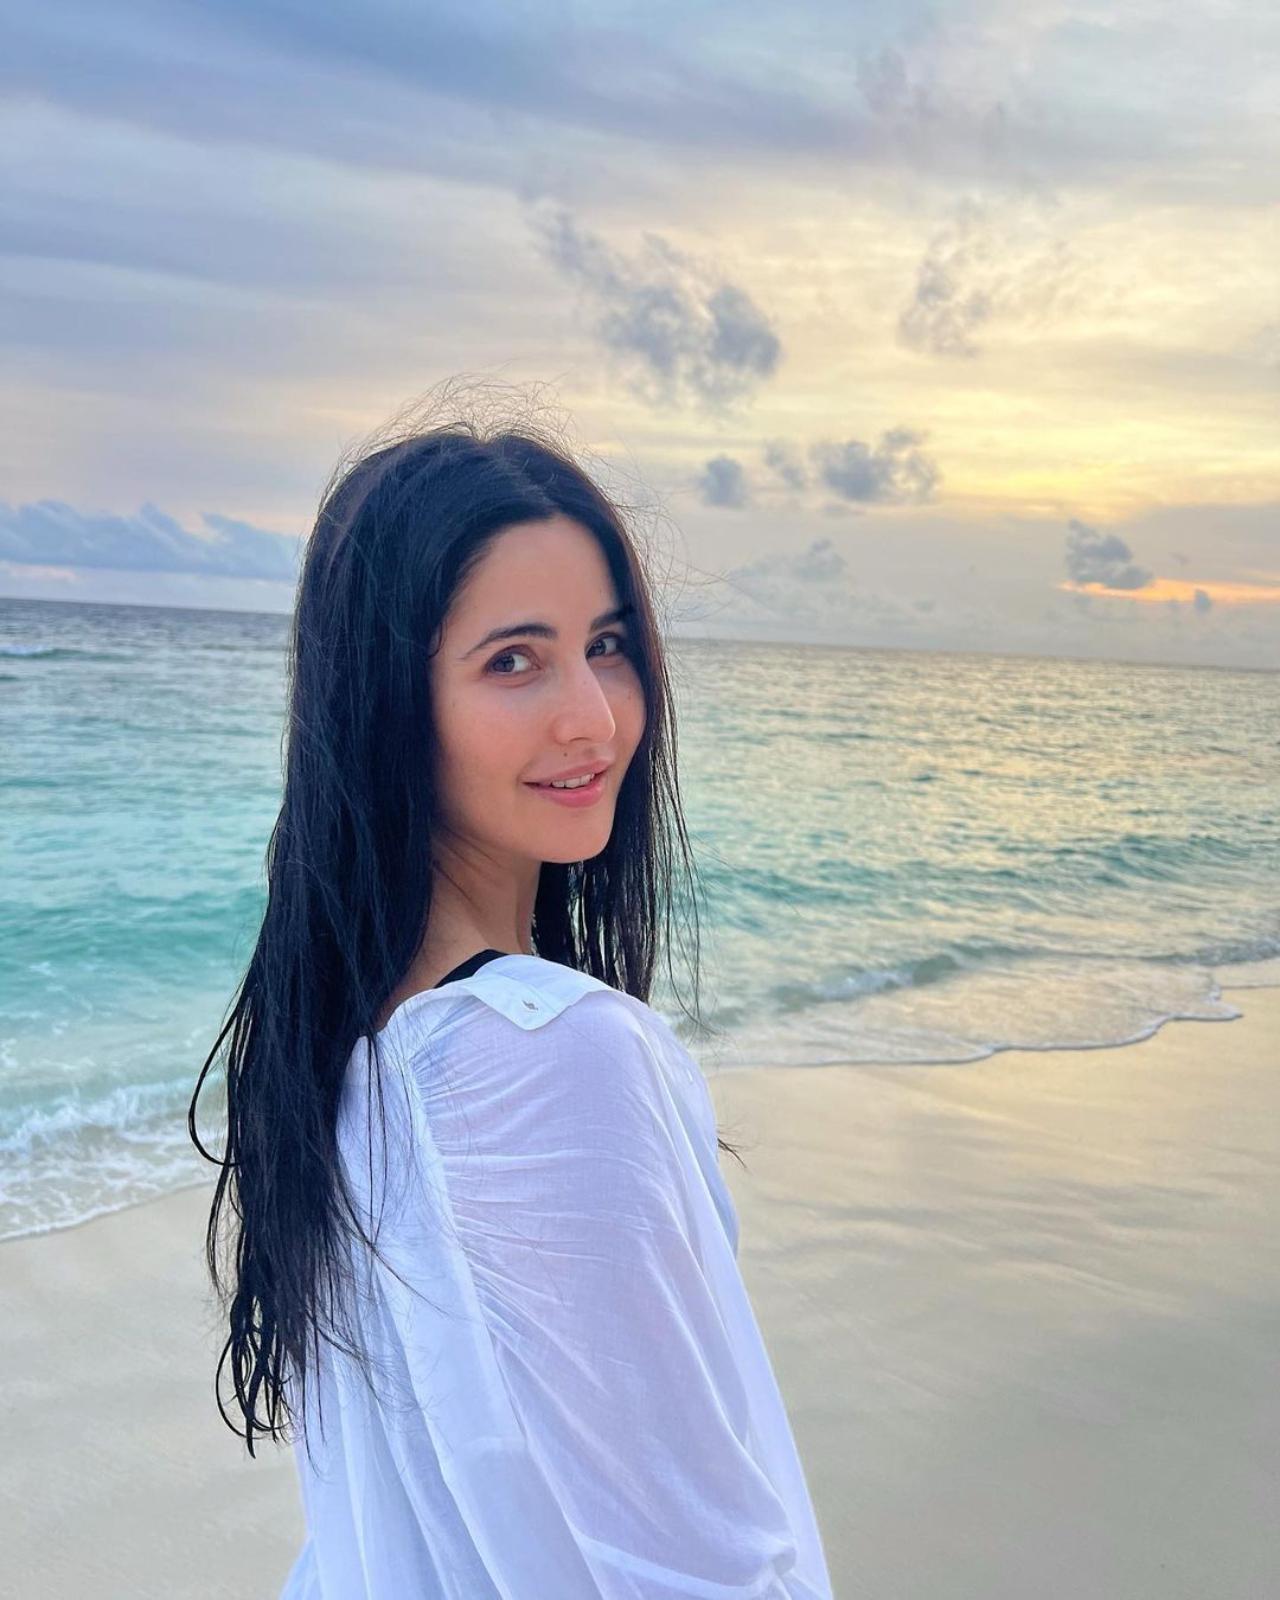 Katrina Kaif turned 39 on Saturday, July 16 and celebrated her birthday at a beach in the Maldives. The actress celebrated her first birthday after her wedding with Vicky Kaushal with her closed ones